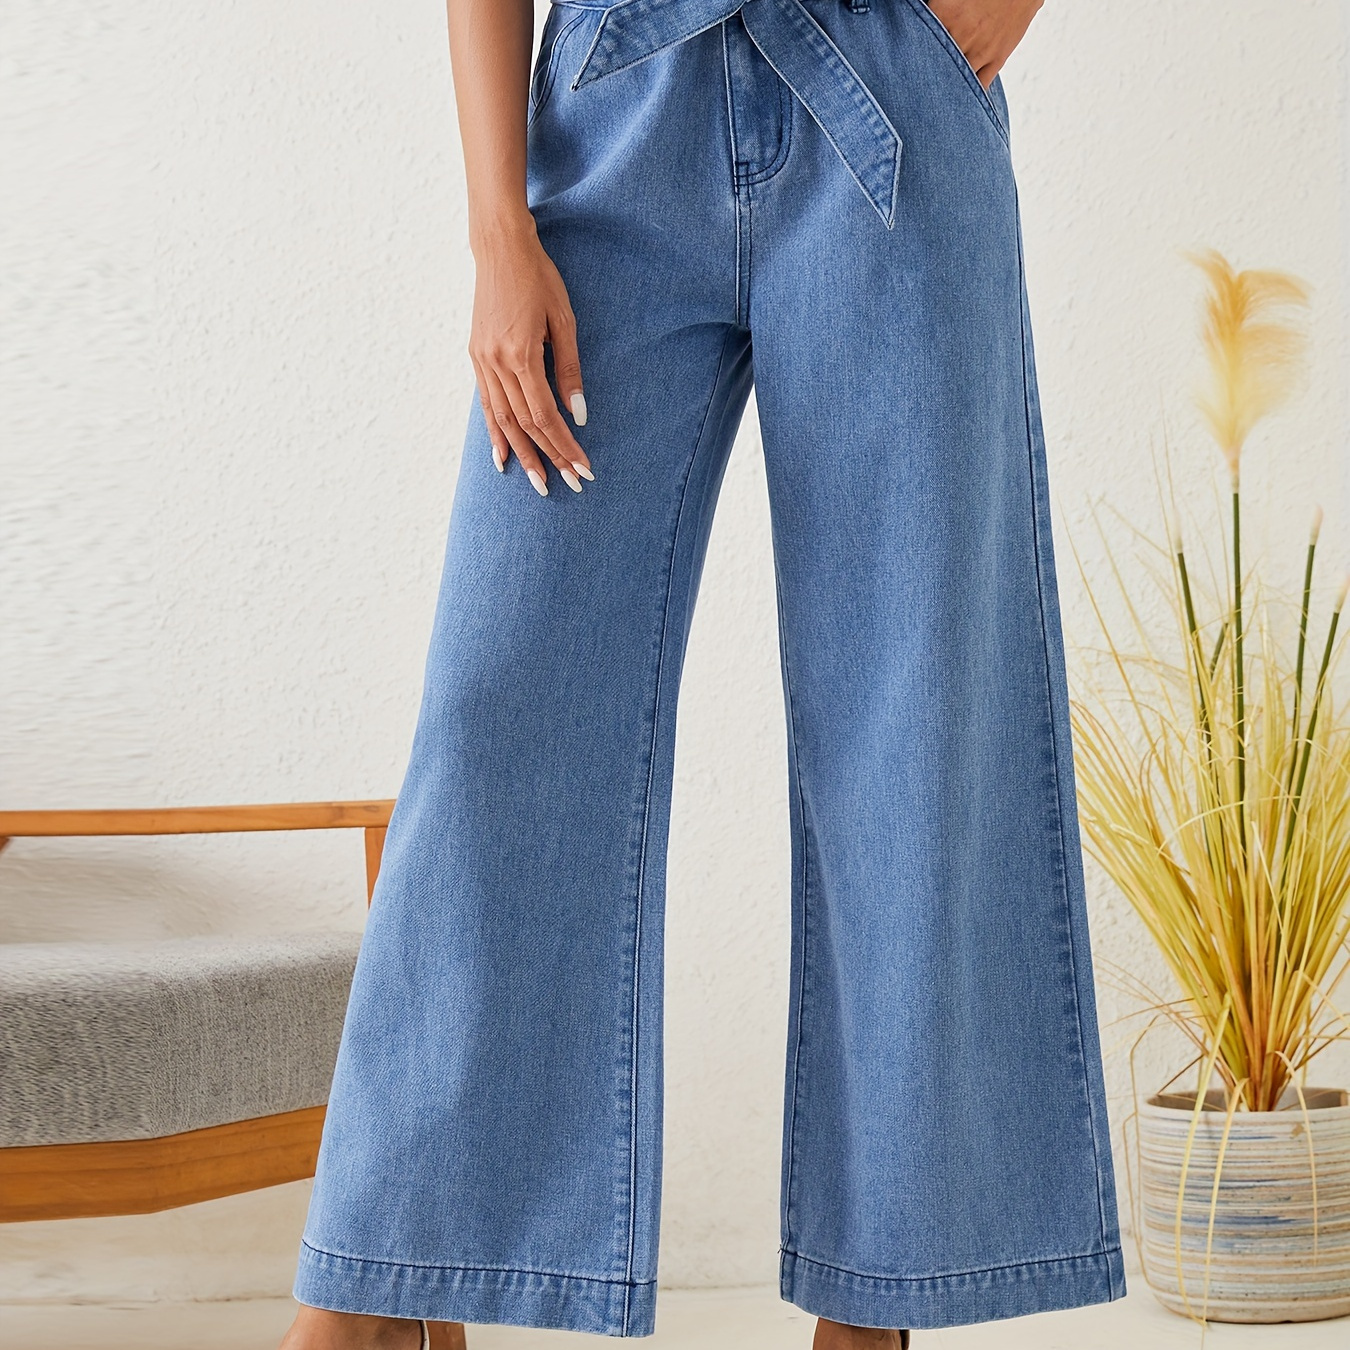 

High Waist With Waistband Baggy Jeans, Slant Pockets Loose Fit Wide Legs Jeans, Women's Denim Jeans & Clothing